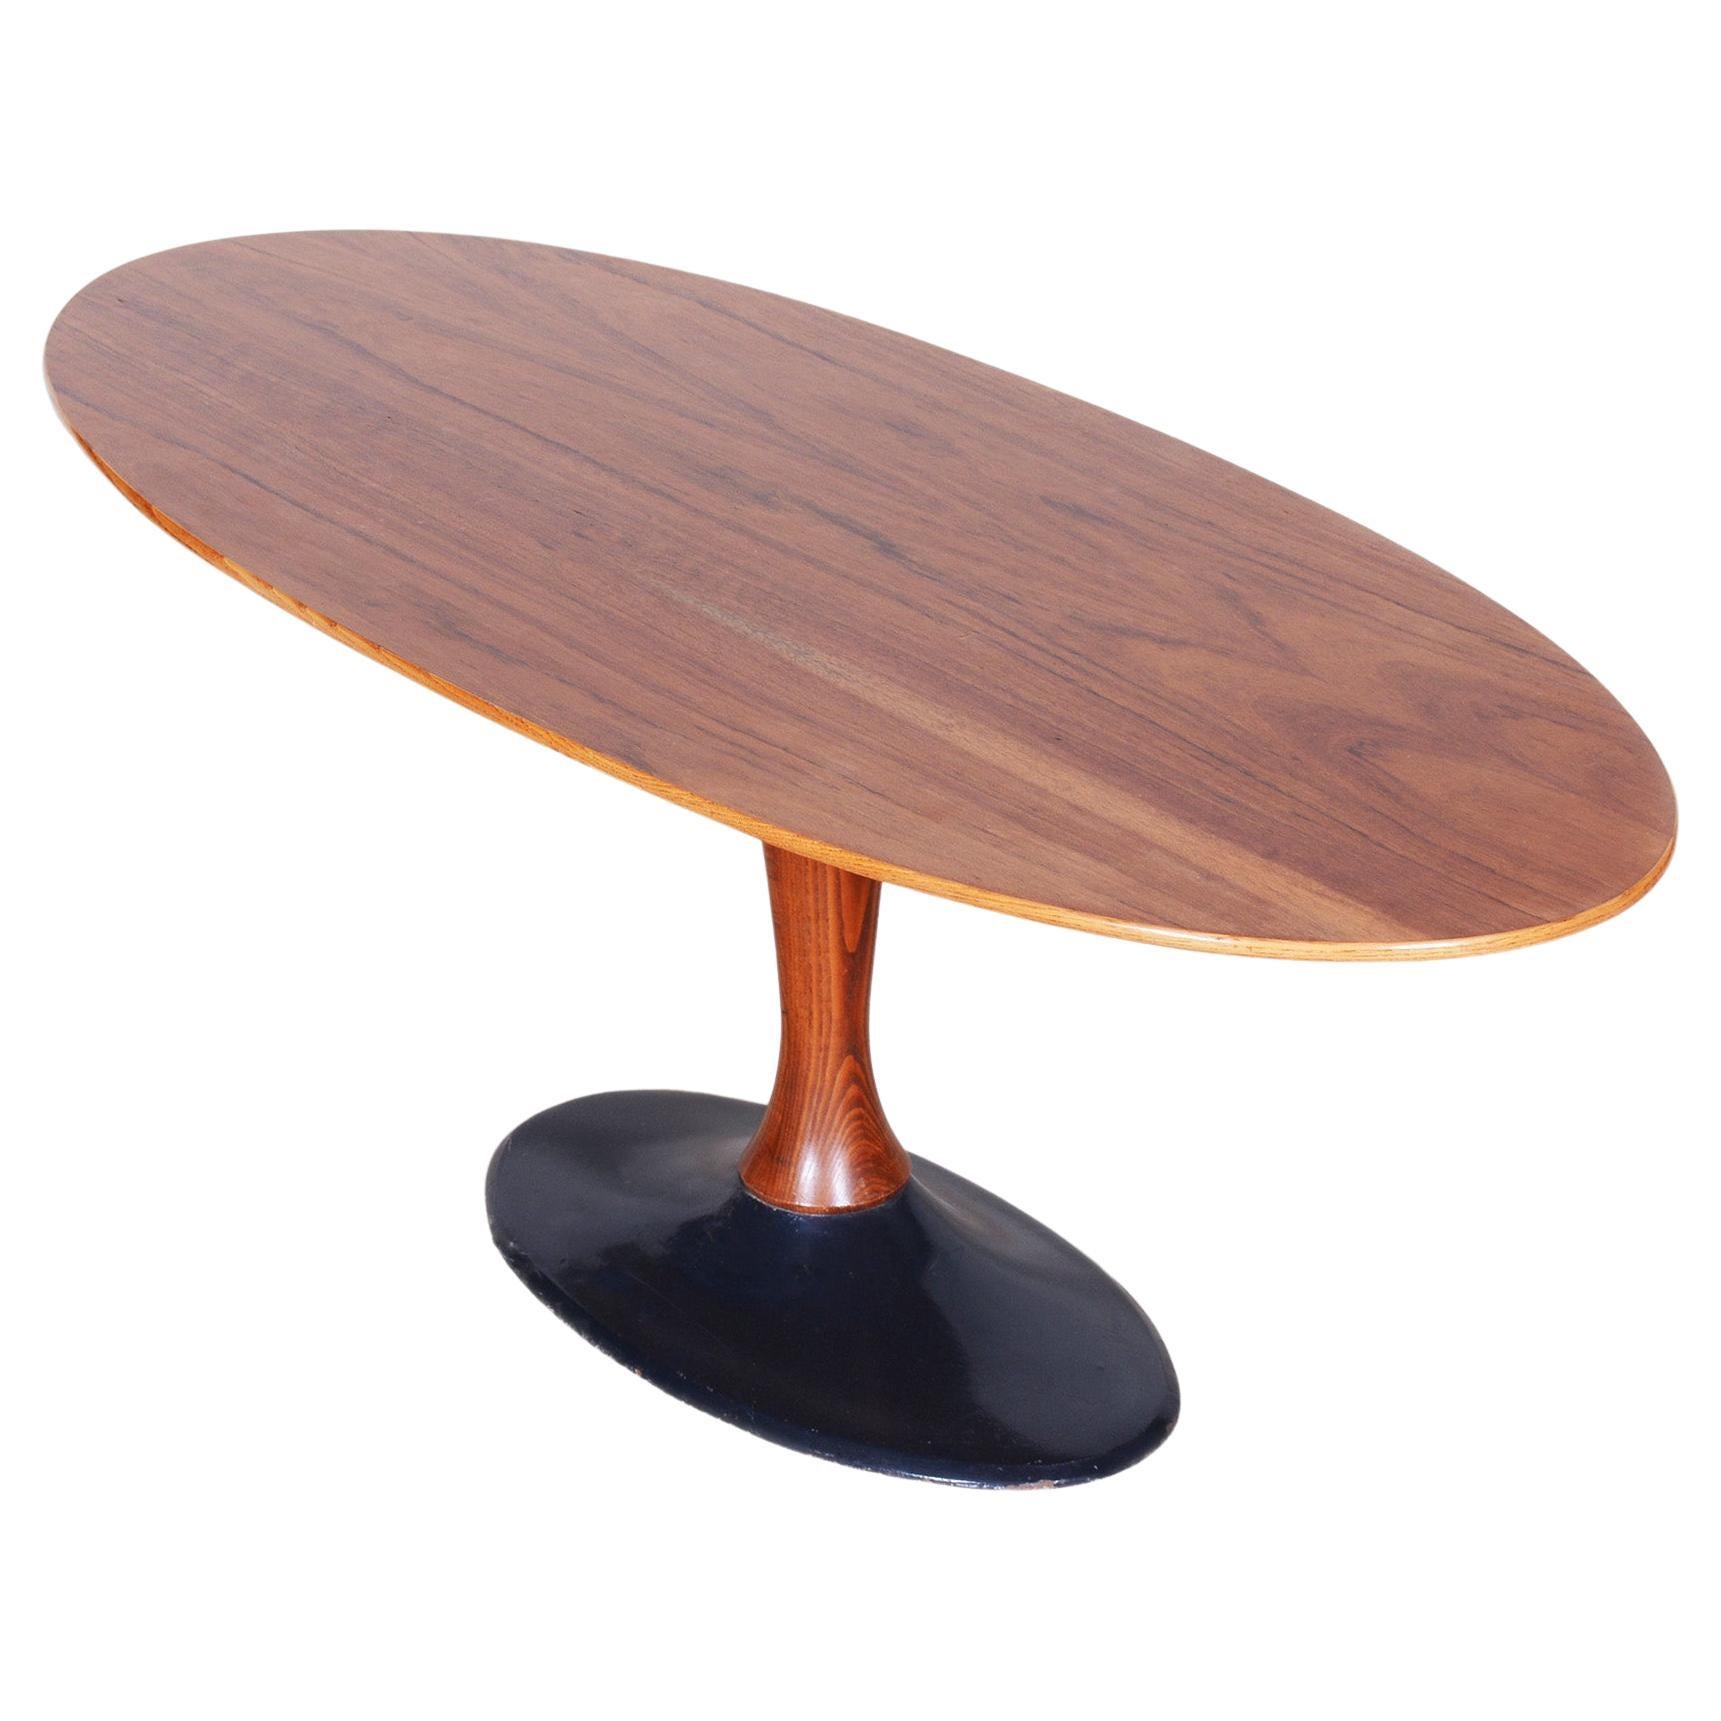 Czech Mid-Century Rosewood Oval Table with Cast Iron Base, 1950s For Sale